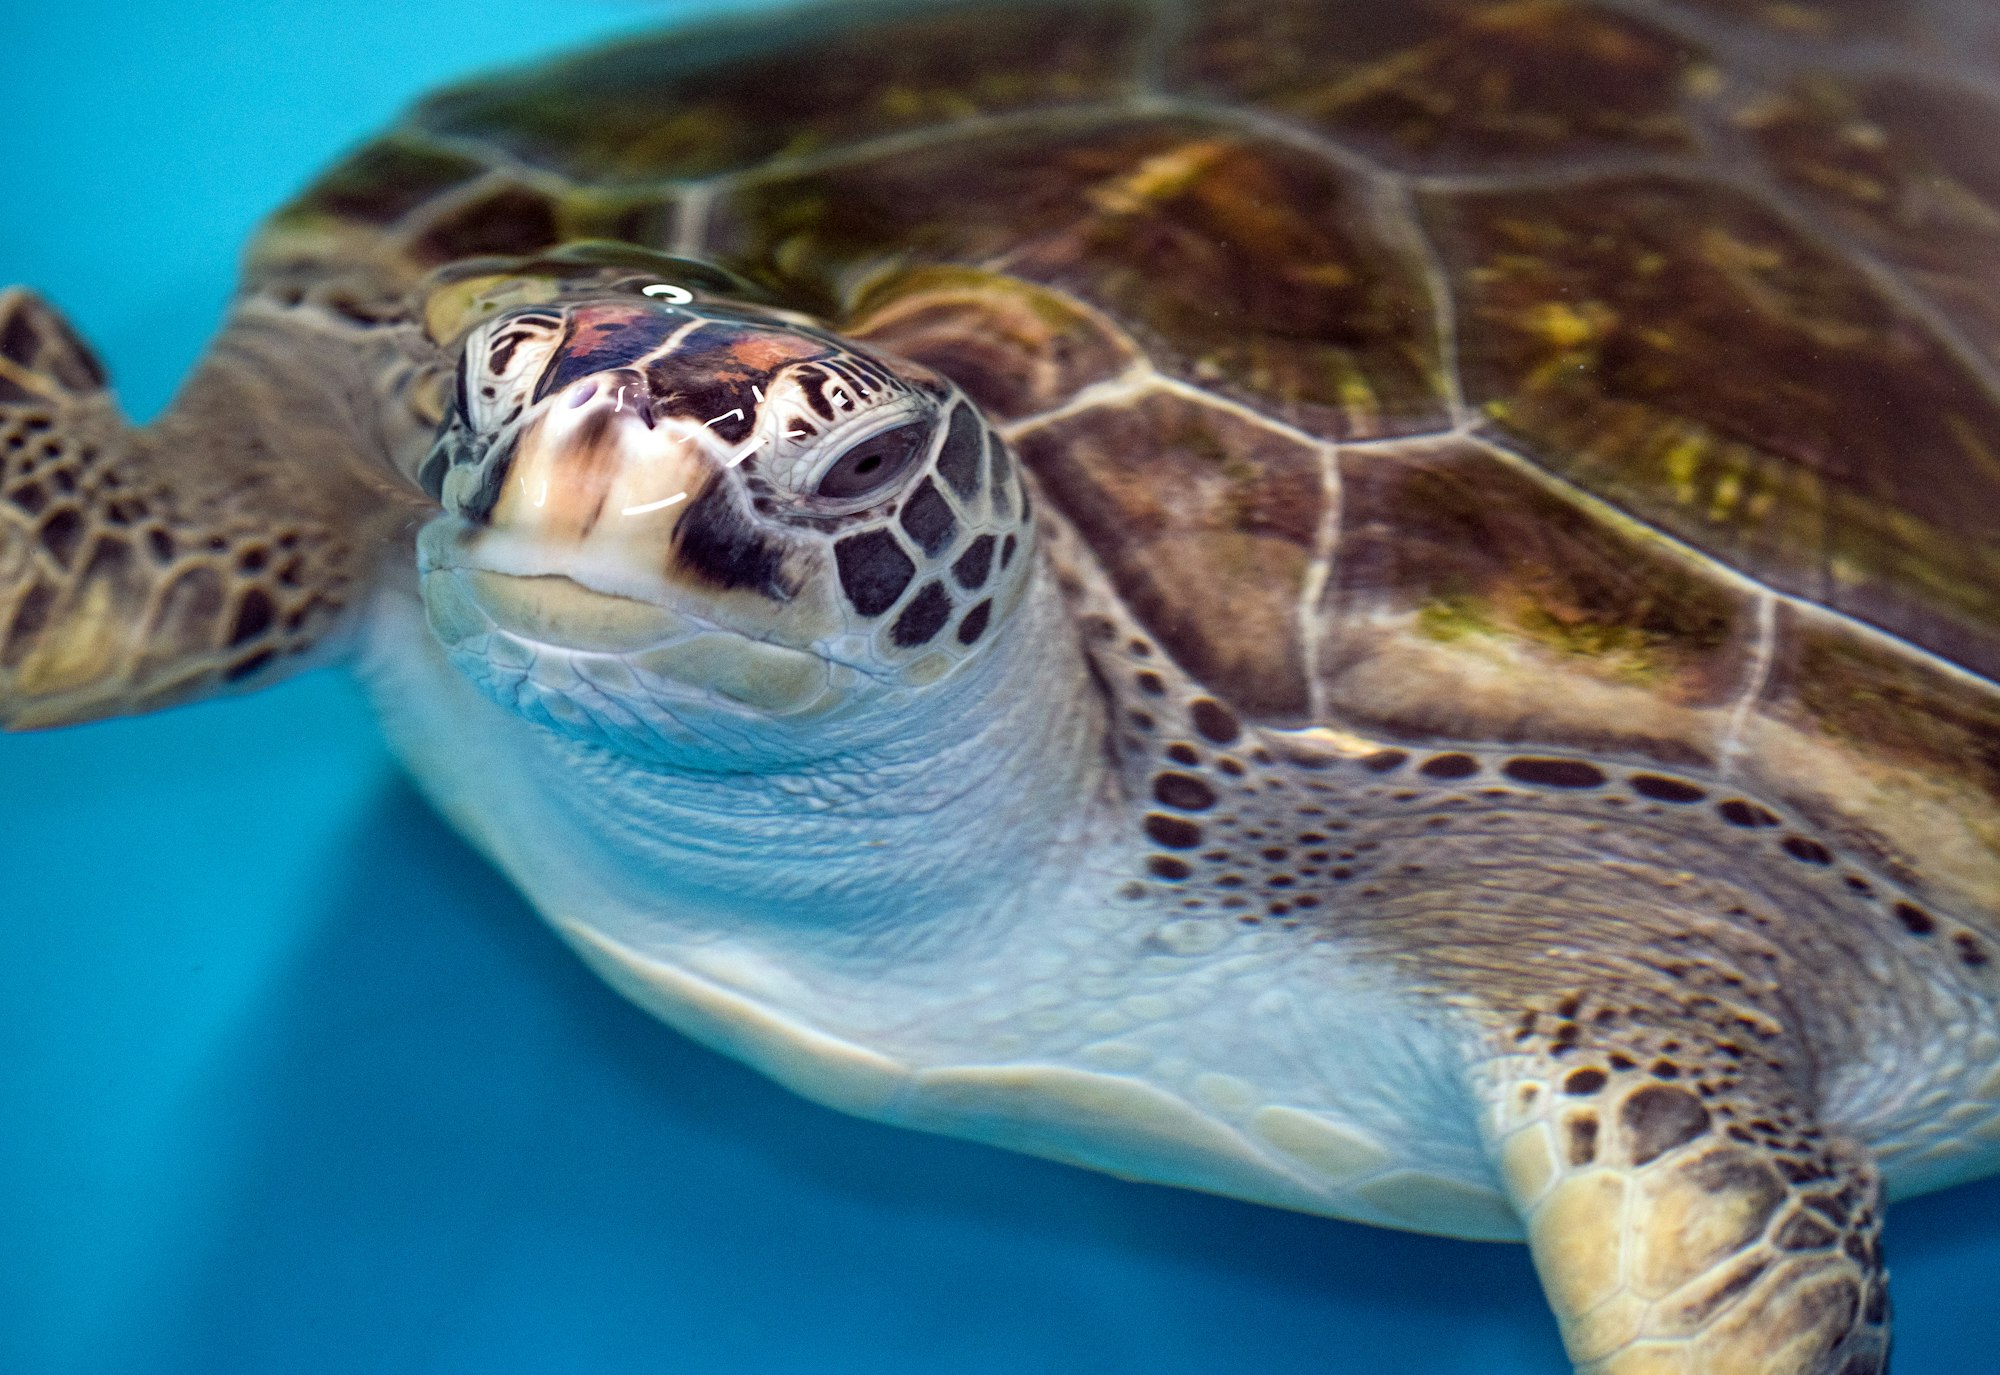 Midori is a green sea turtle who was found sick and hungry, and has been looked after by the staff at the Cairns Aquarium. She is now well again, and will be released back into the wild soon.